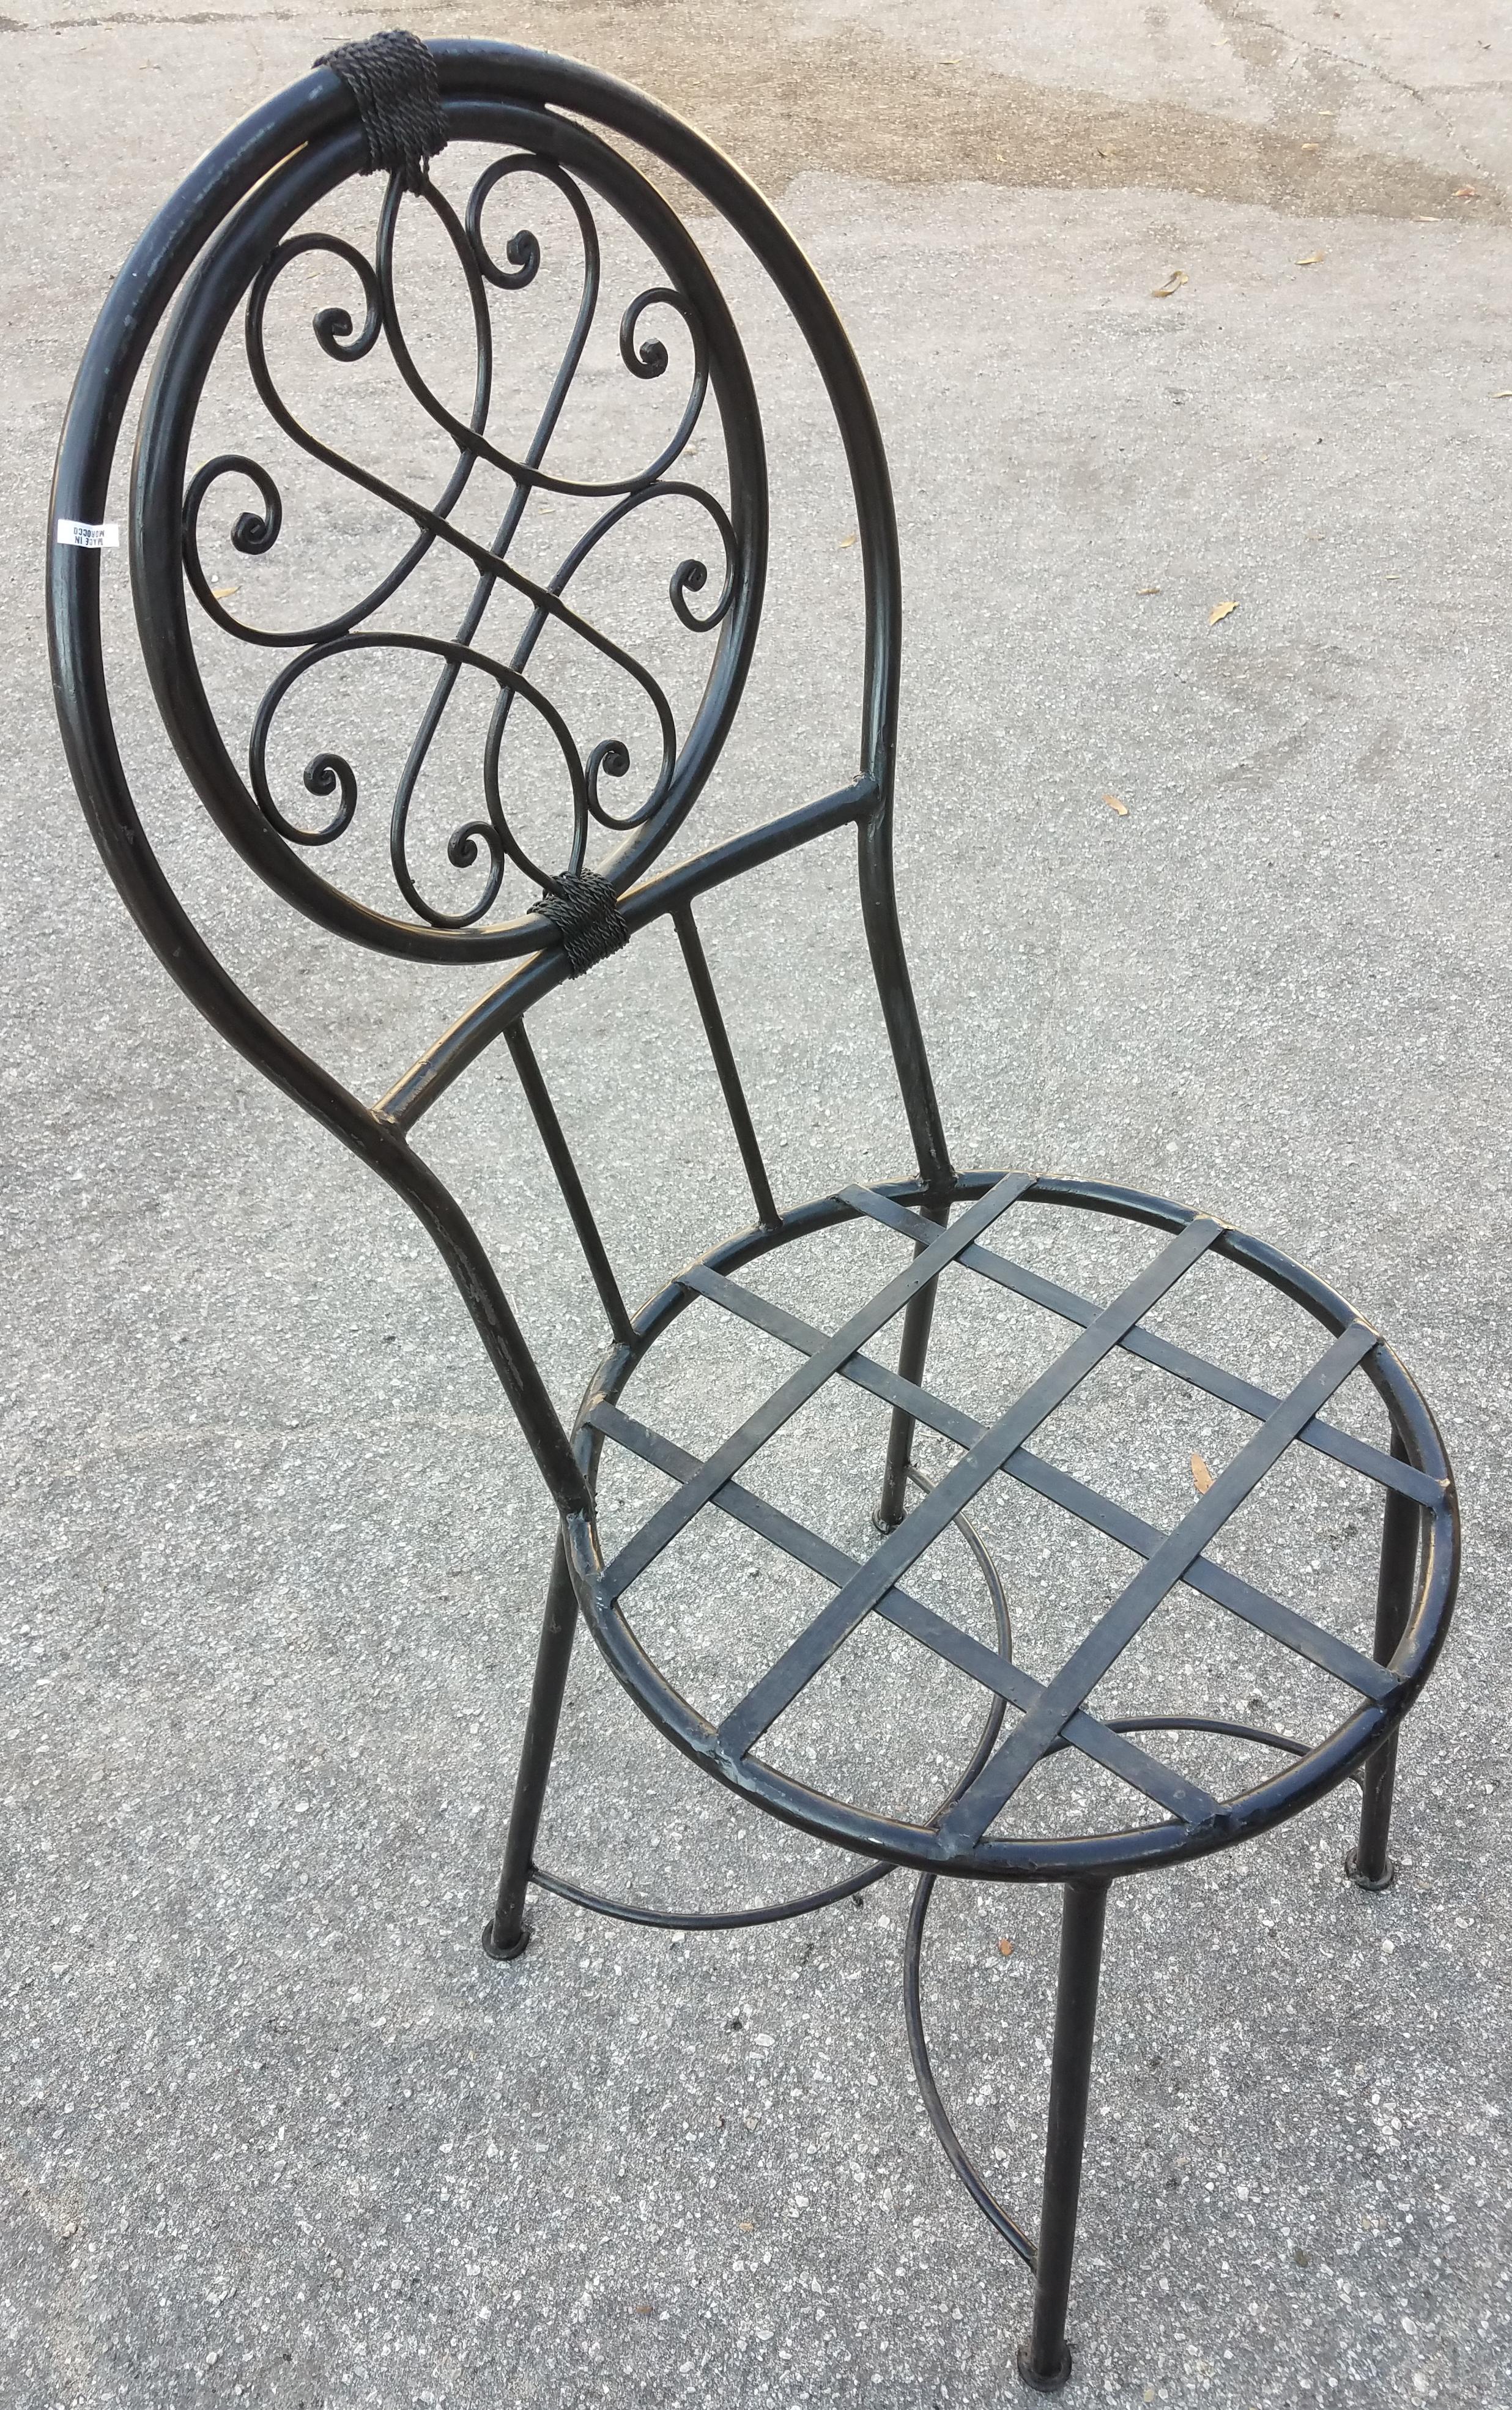 Moroccan Wrought Iron Chairs - Dining Room Round In New Condition For Sale In Orlando, FL